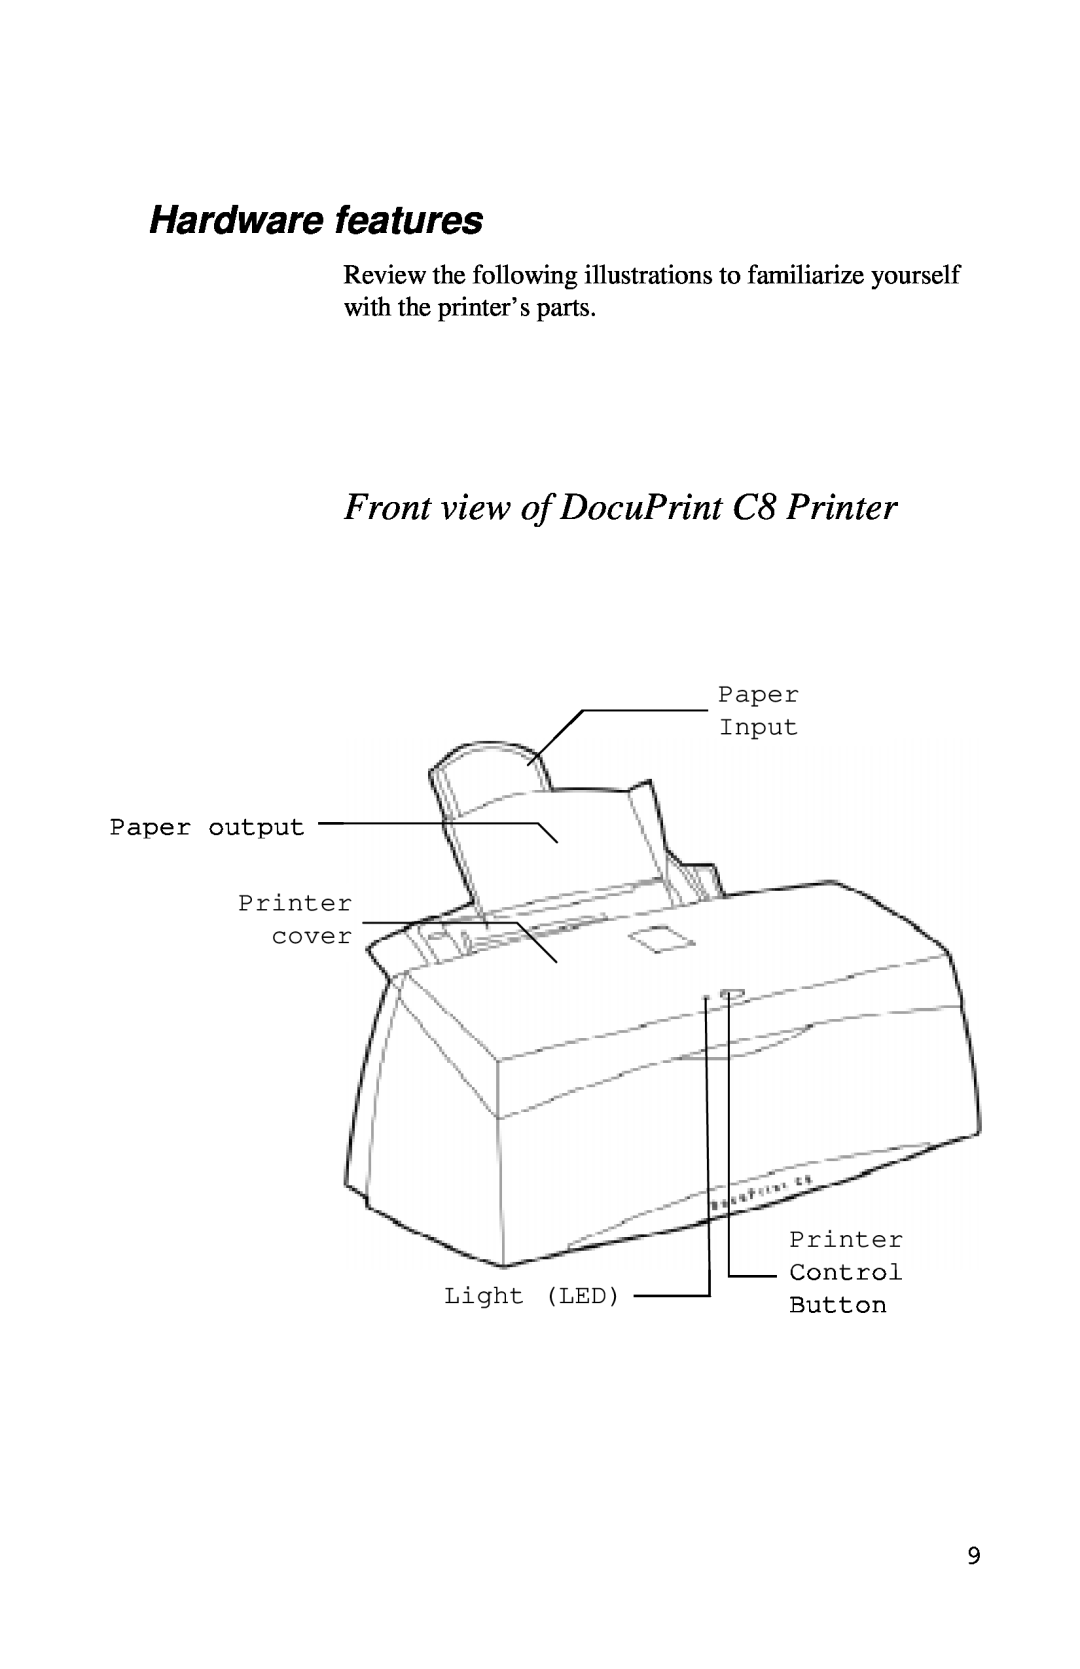 Xerox Inkjet Printer Hardware features, Front view of DocuPrint C8 Printer, Paper Input Paper output Printer cover, Button 